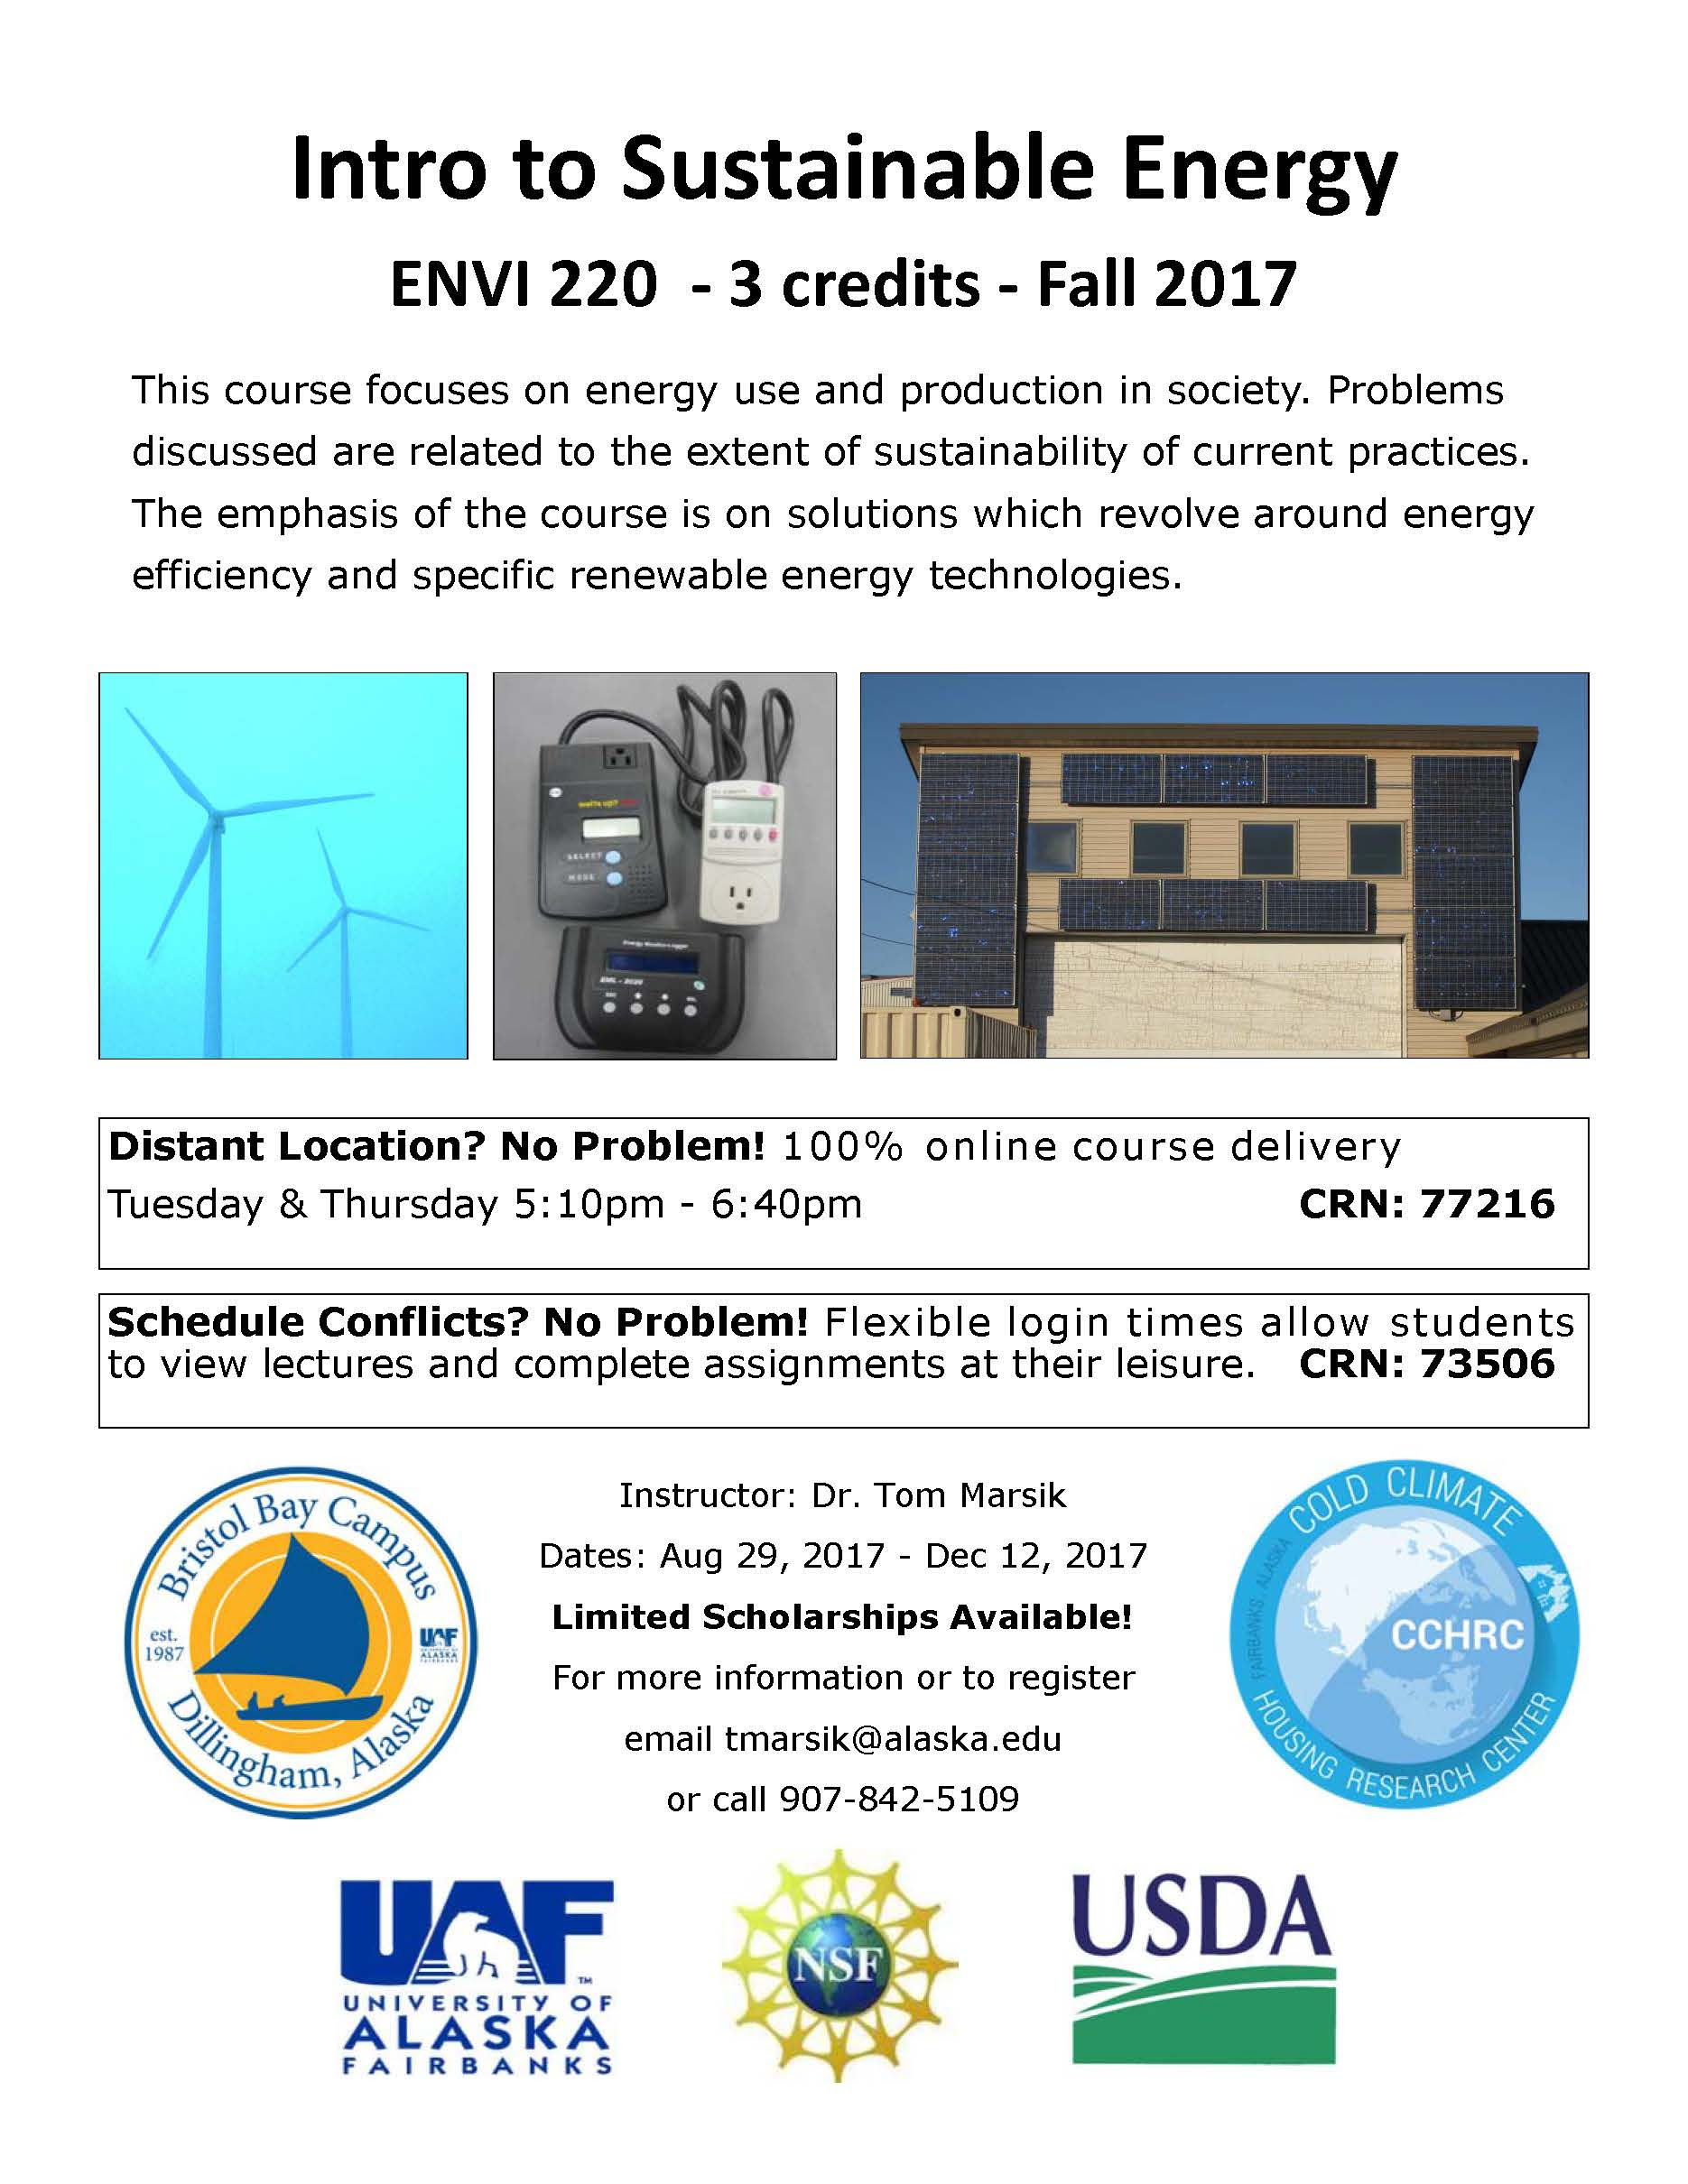 Introduction to Sustainable Energy Class